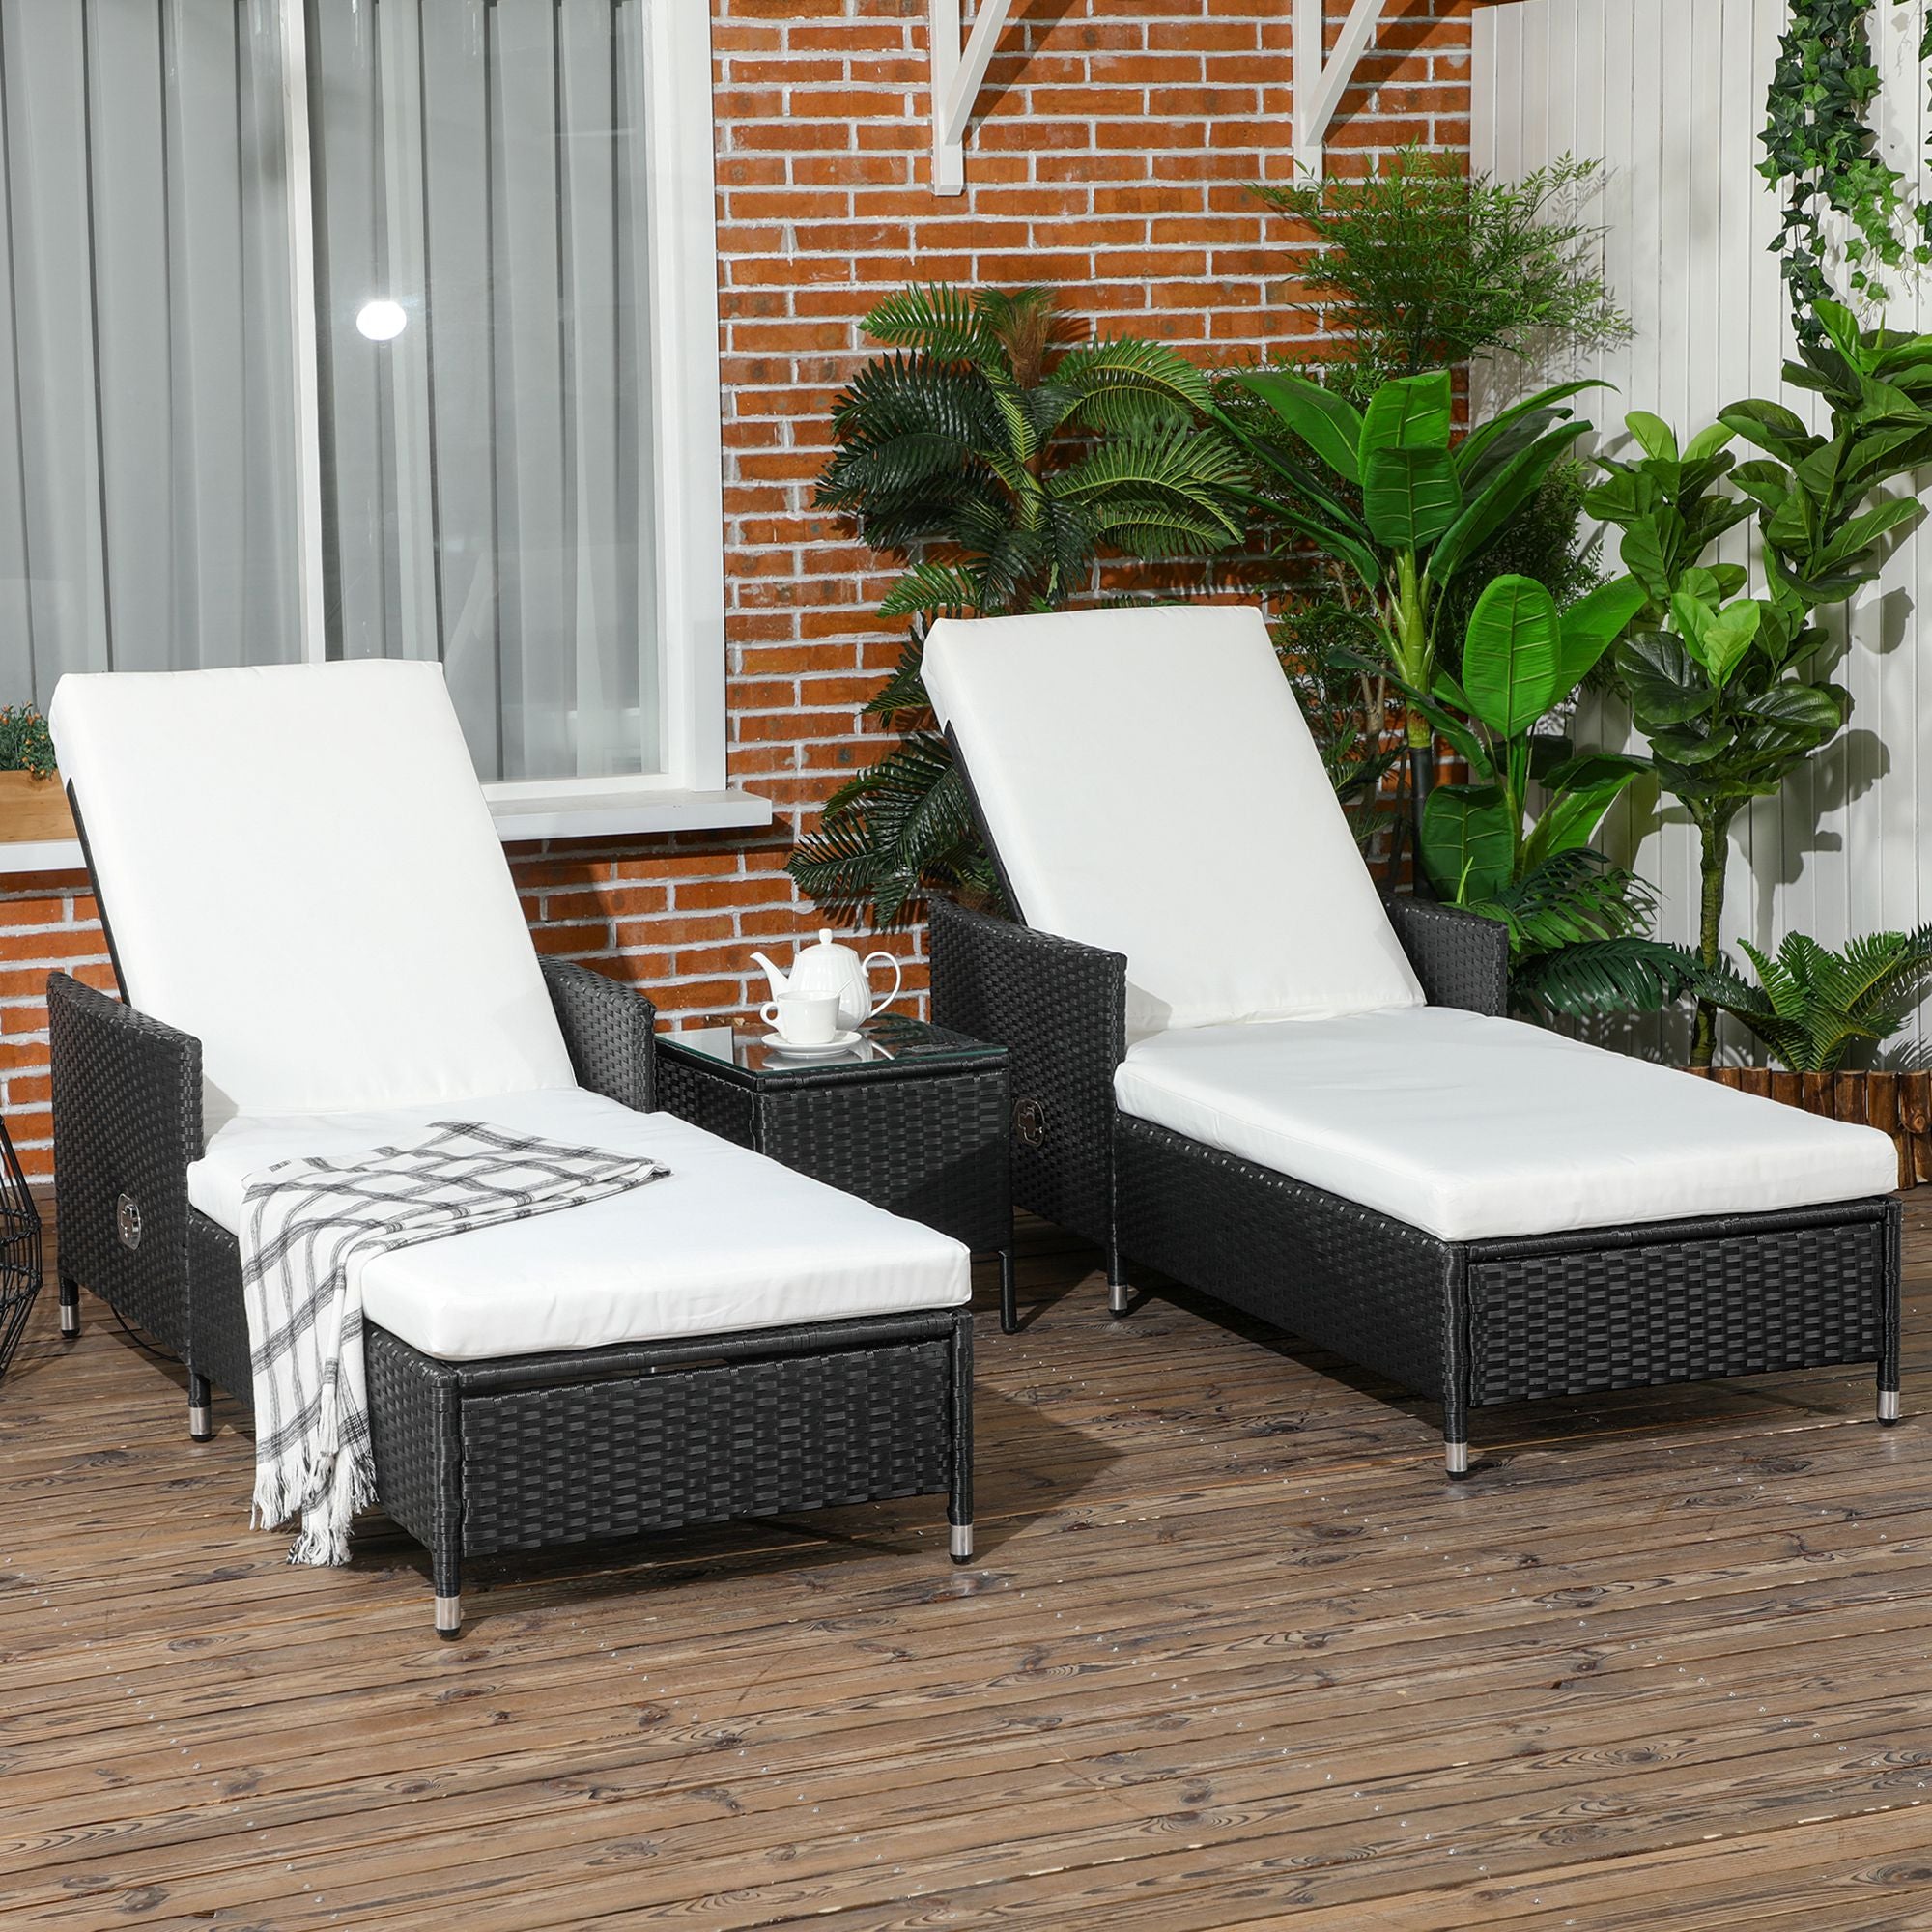 Outsunny 3-Pieces Rattan Sun Lounger, Patio Chaise Lounge Chair Set with Adjustable Backrest, Soft Cushions, Glass Top Table, Cream White